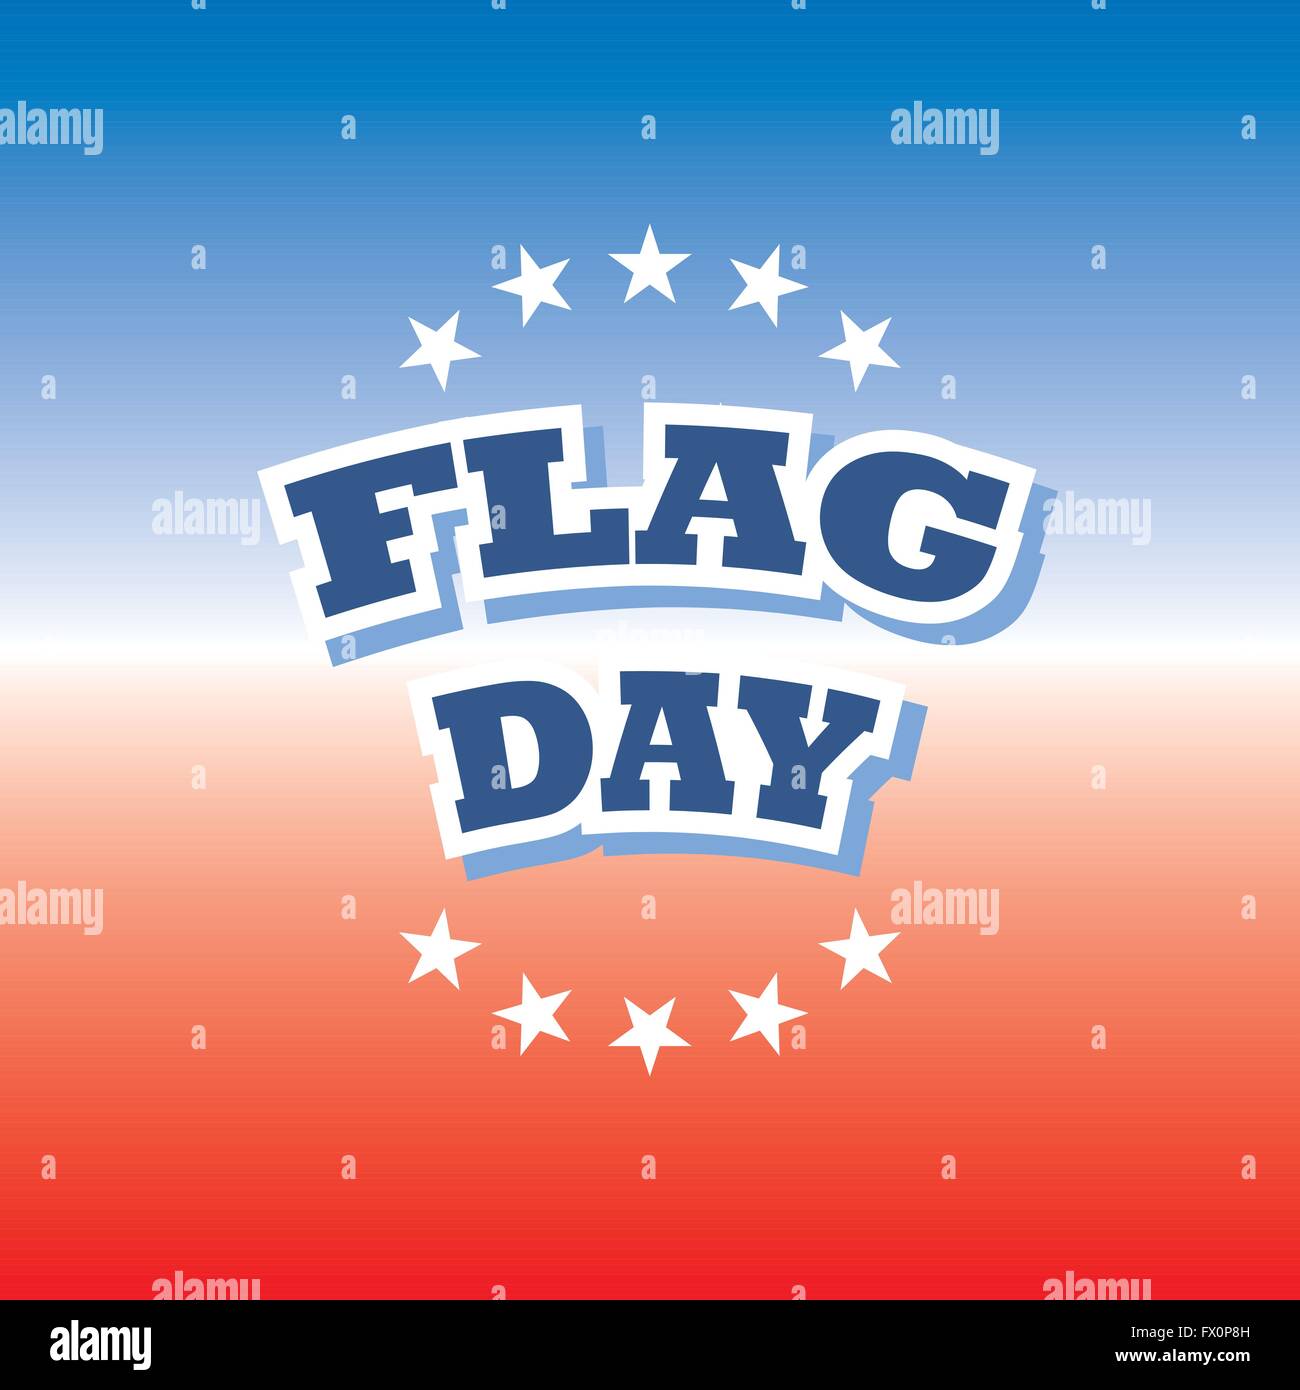 flag day banner on red and blue background Stock Vector